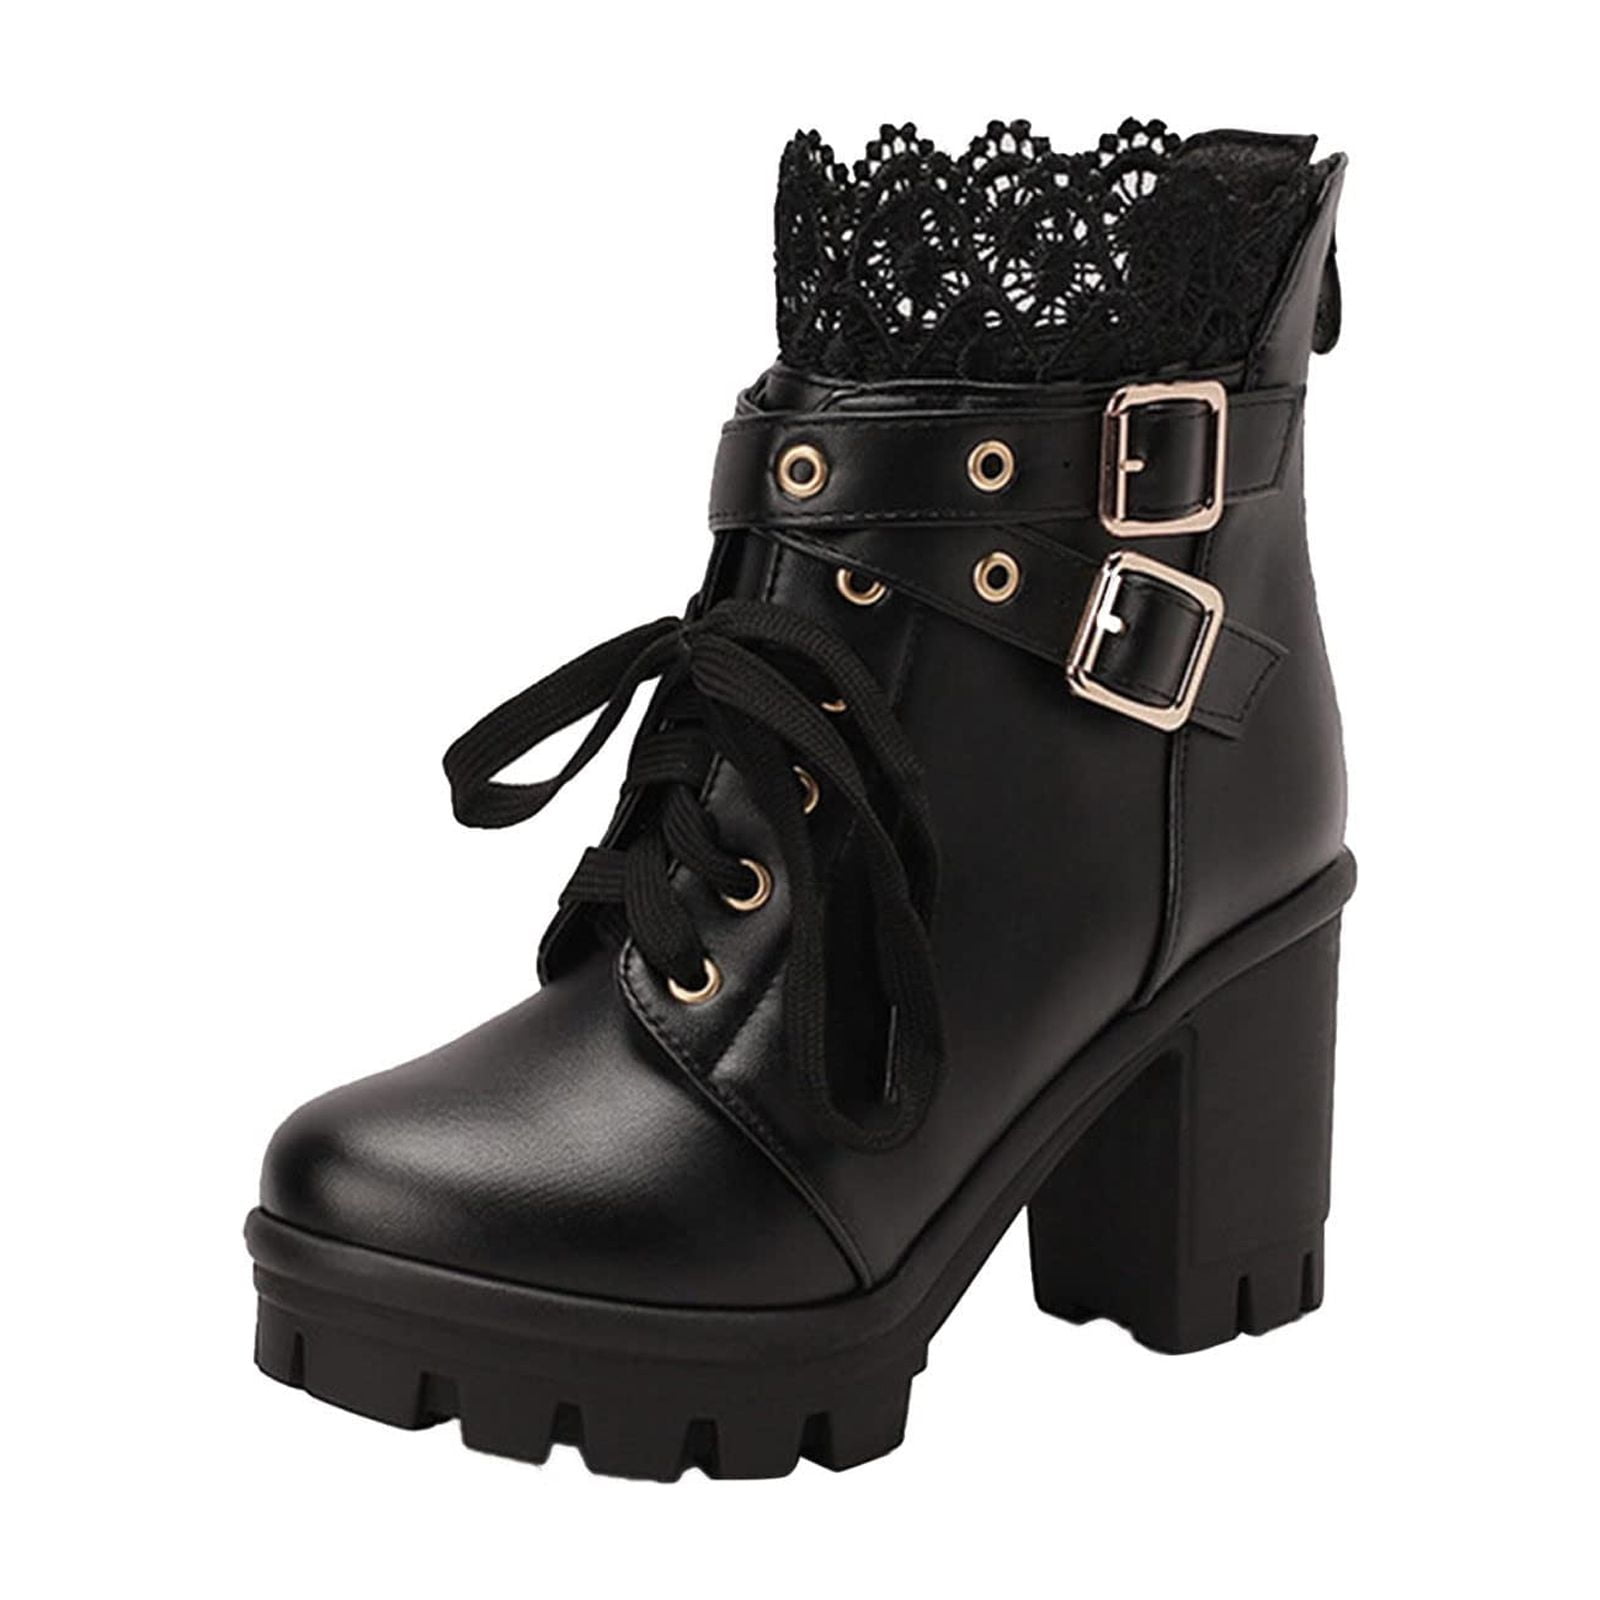 Buy Caradise Womens Buckle Heeled Combat Boots with Chains Goth Platform  Lace Up Chunky Ankle Boots Size 7 B(M) US,3 Black at Amazon.in